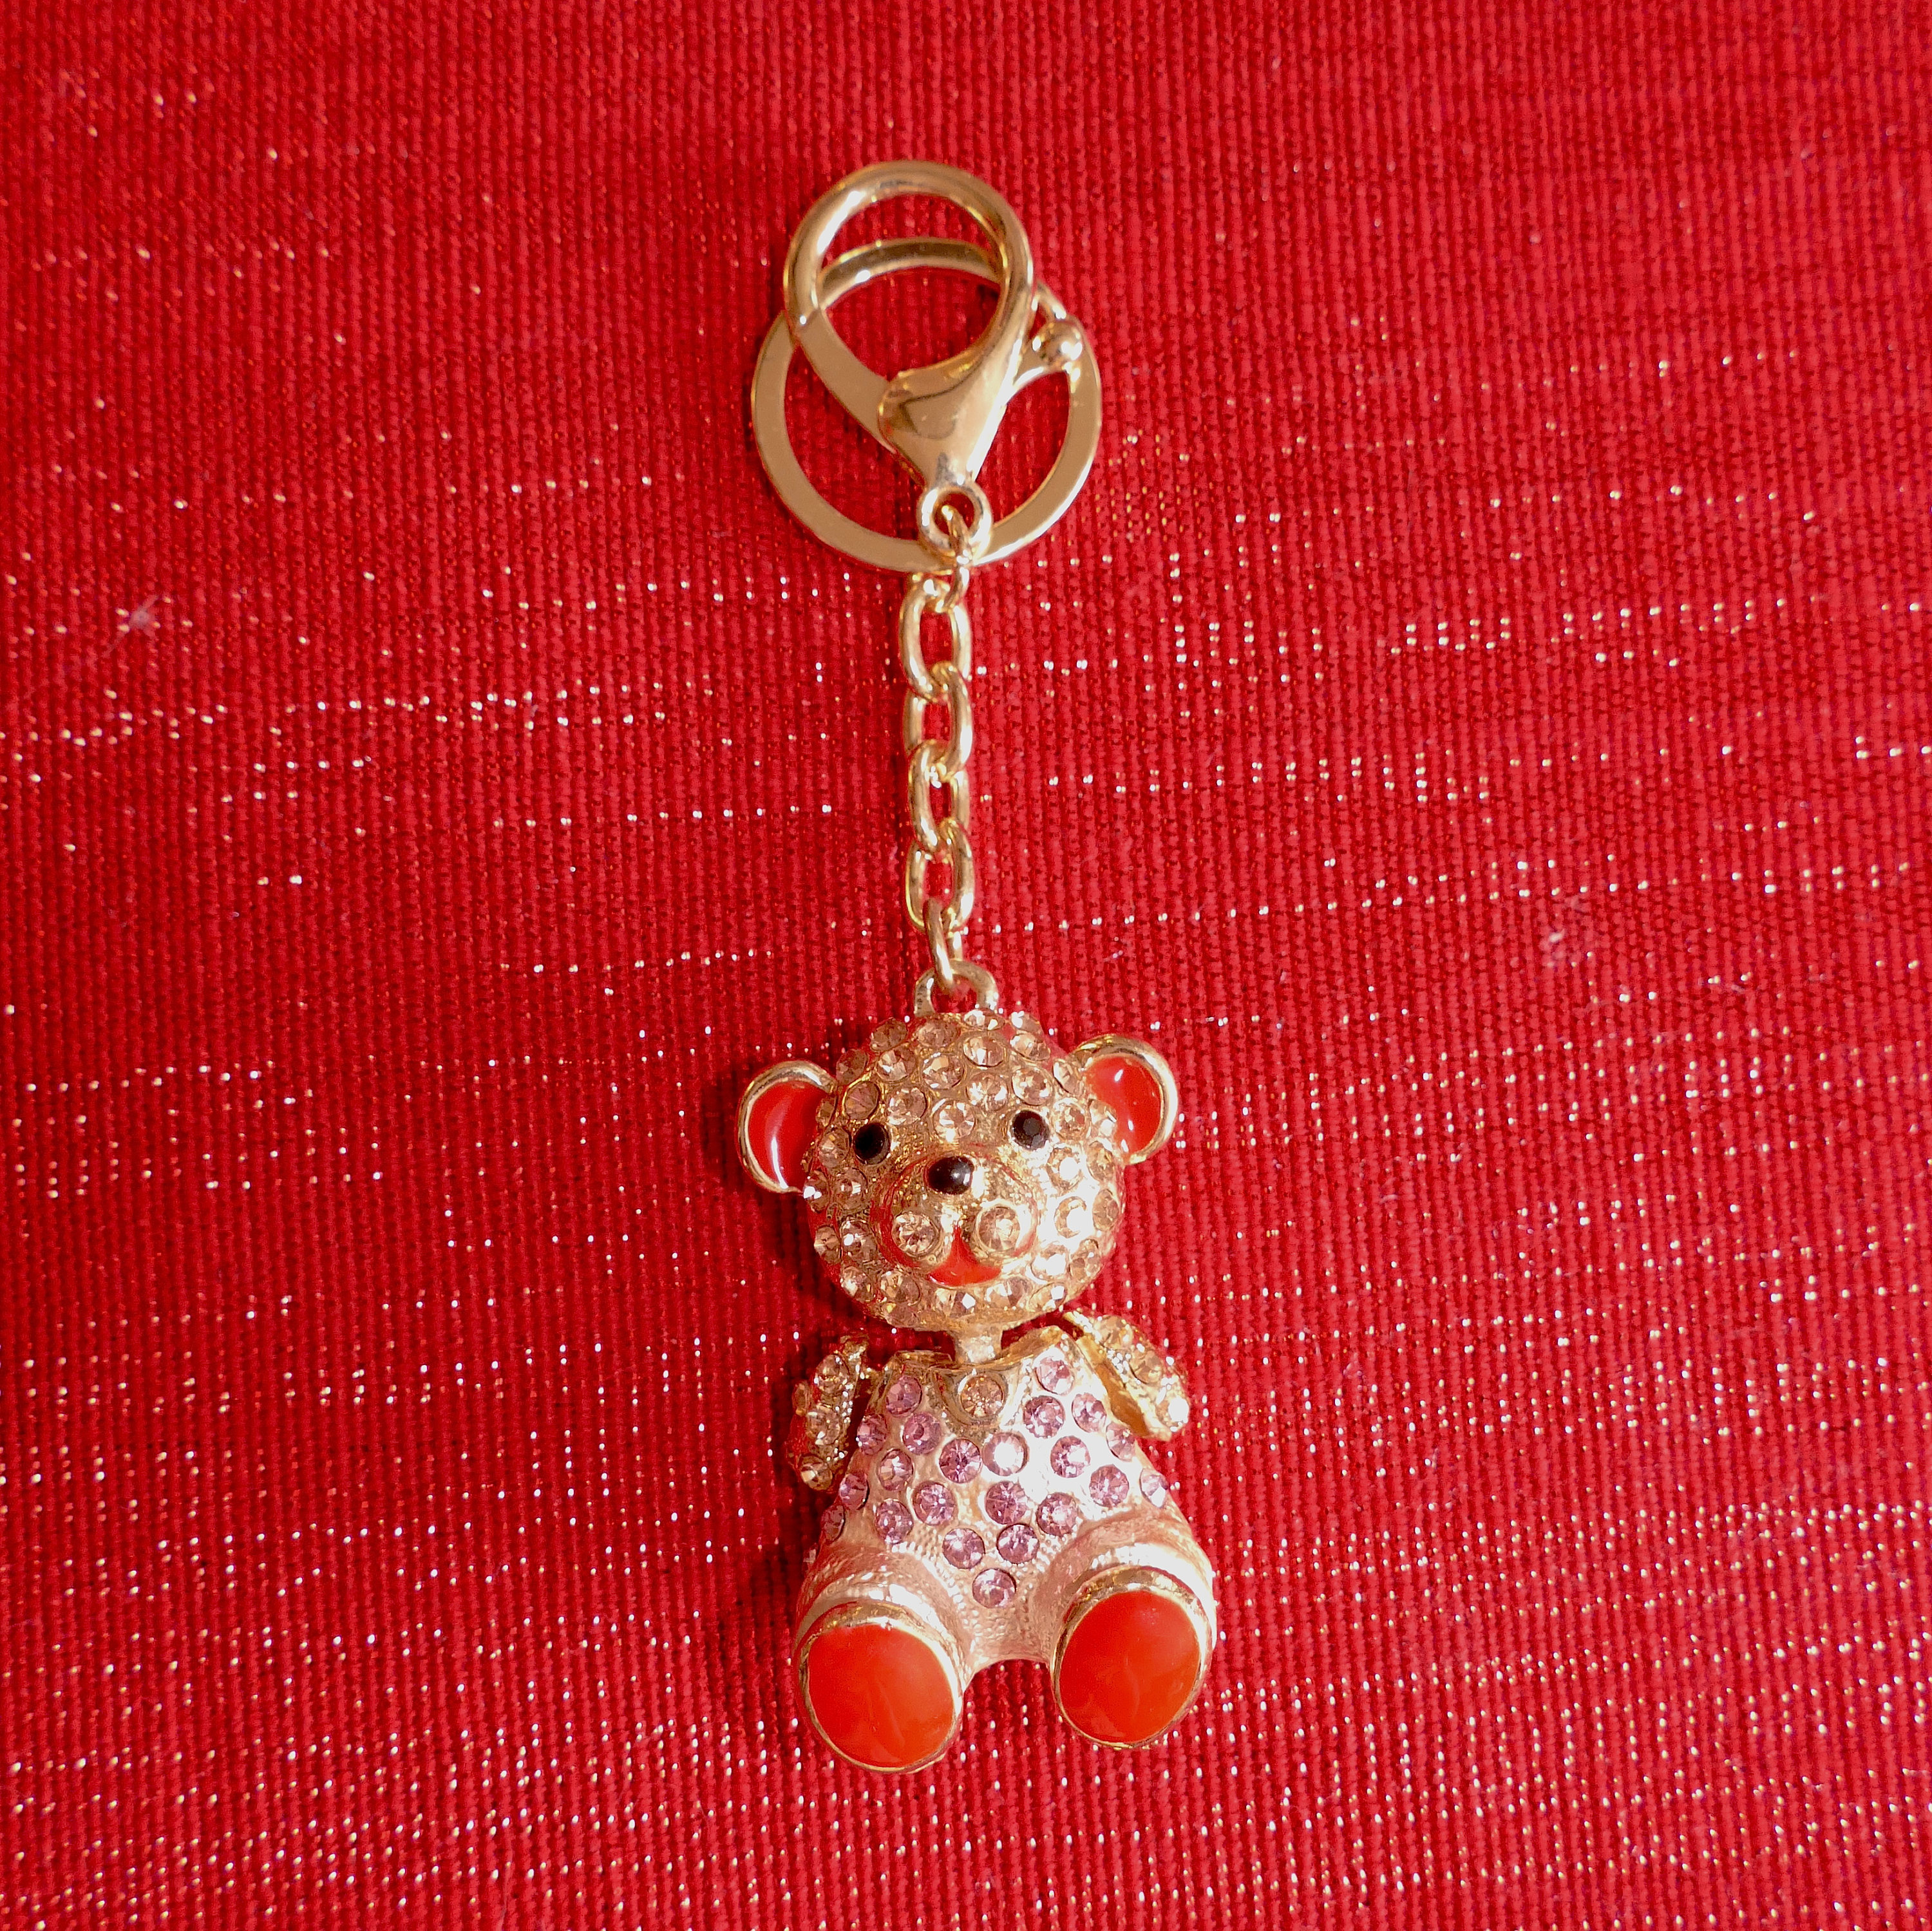 Beautiful Cute Gold and Pink Coloured Teddy Bear Charm Pendant Crystal  Purse Ladies Handbag Key Ring Chain Lucky Gift - Etsy